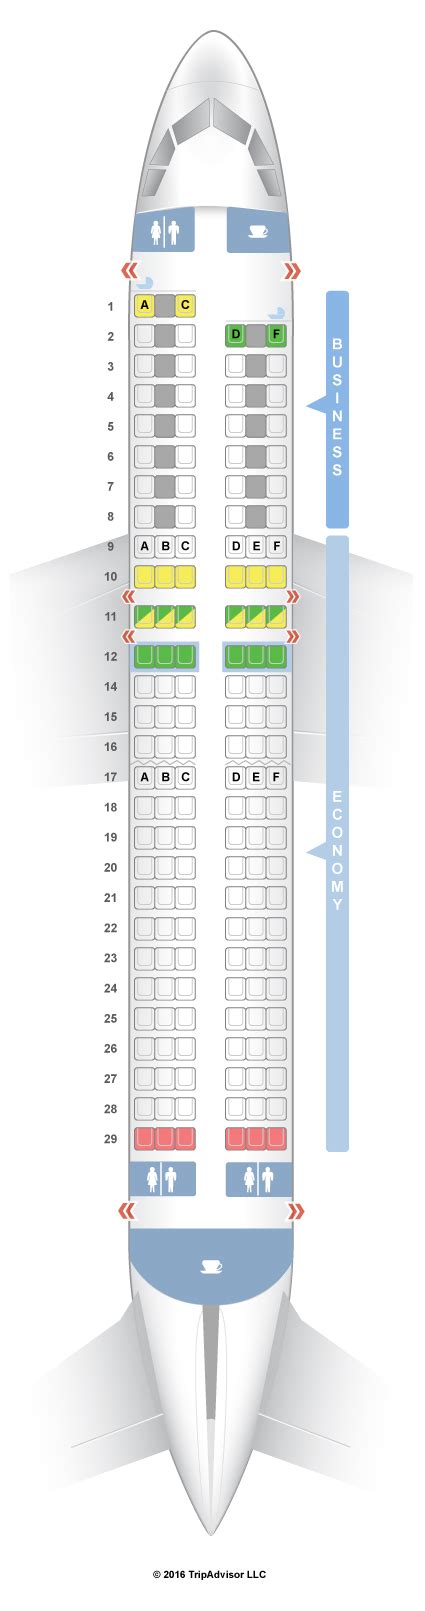 Air France Seat Map Park Houston Map